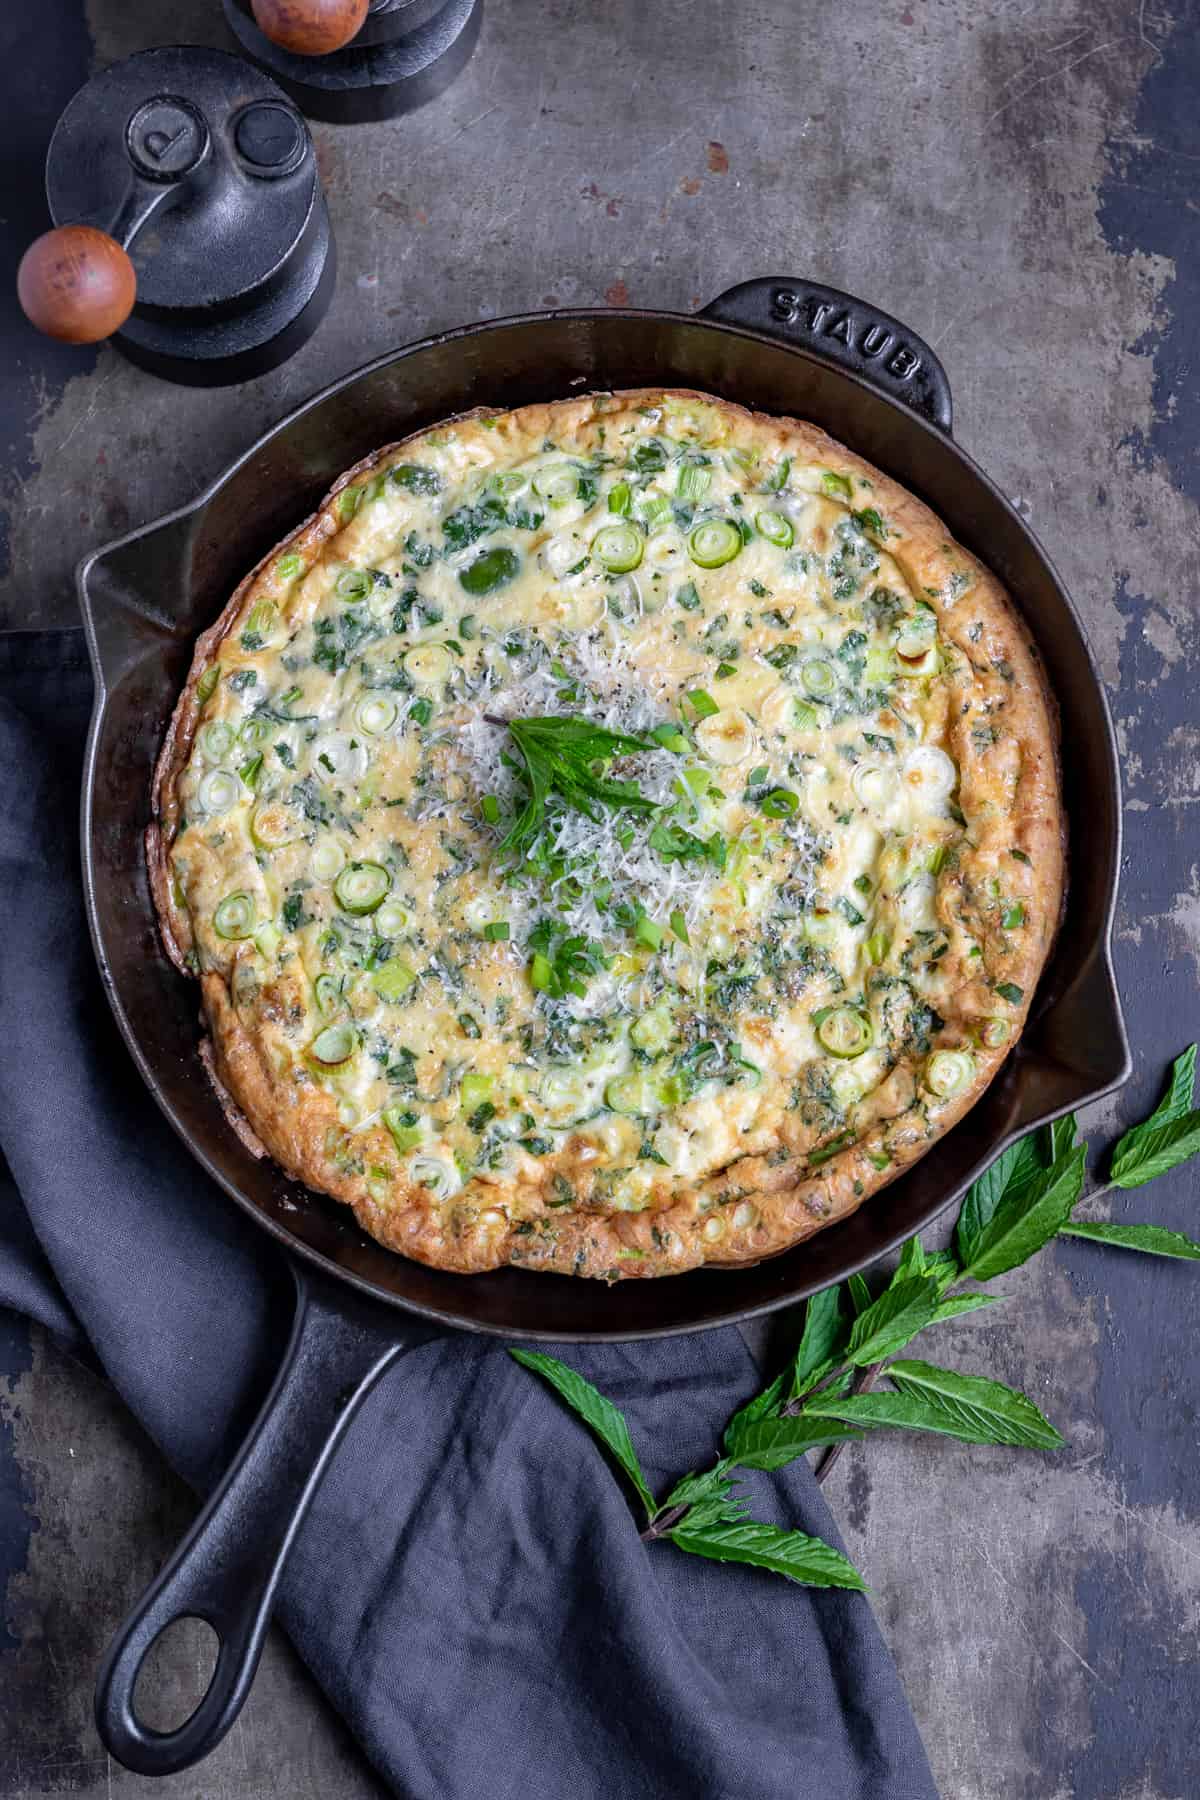 A table with a cast iron skillet of broad bean frittata.